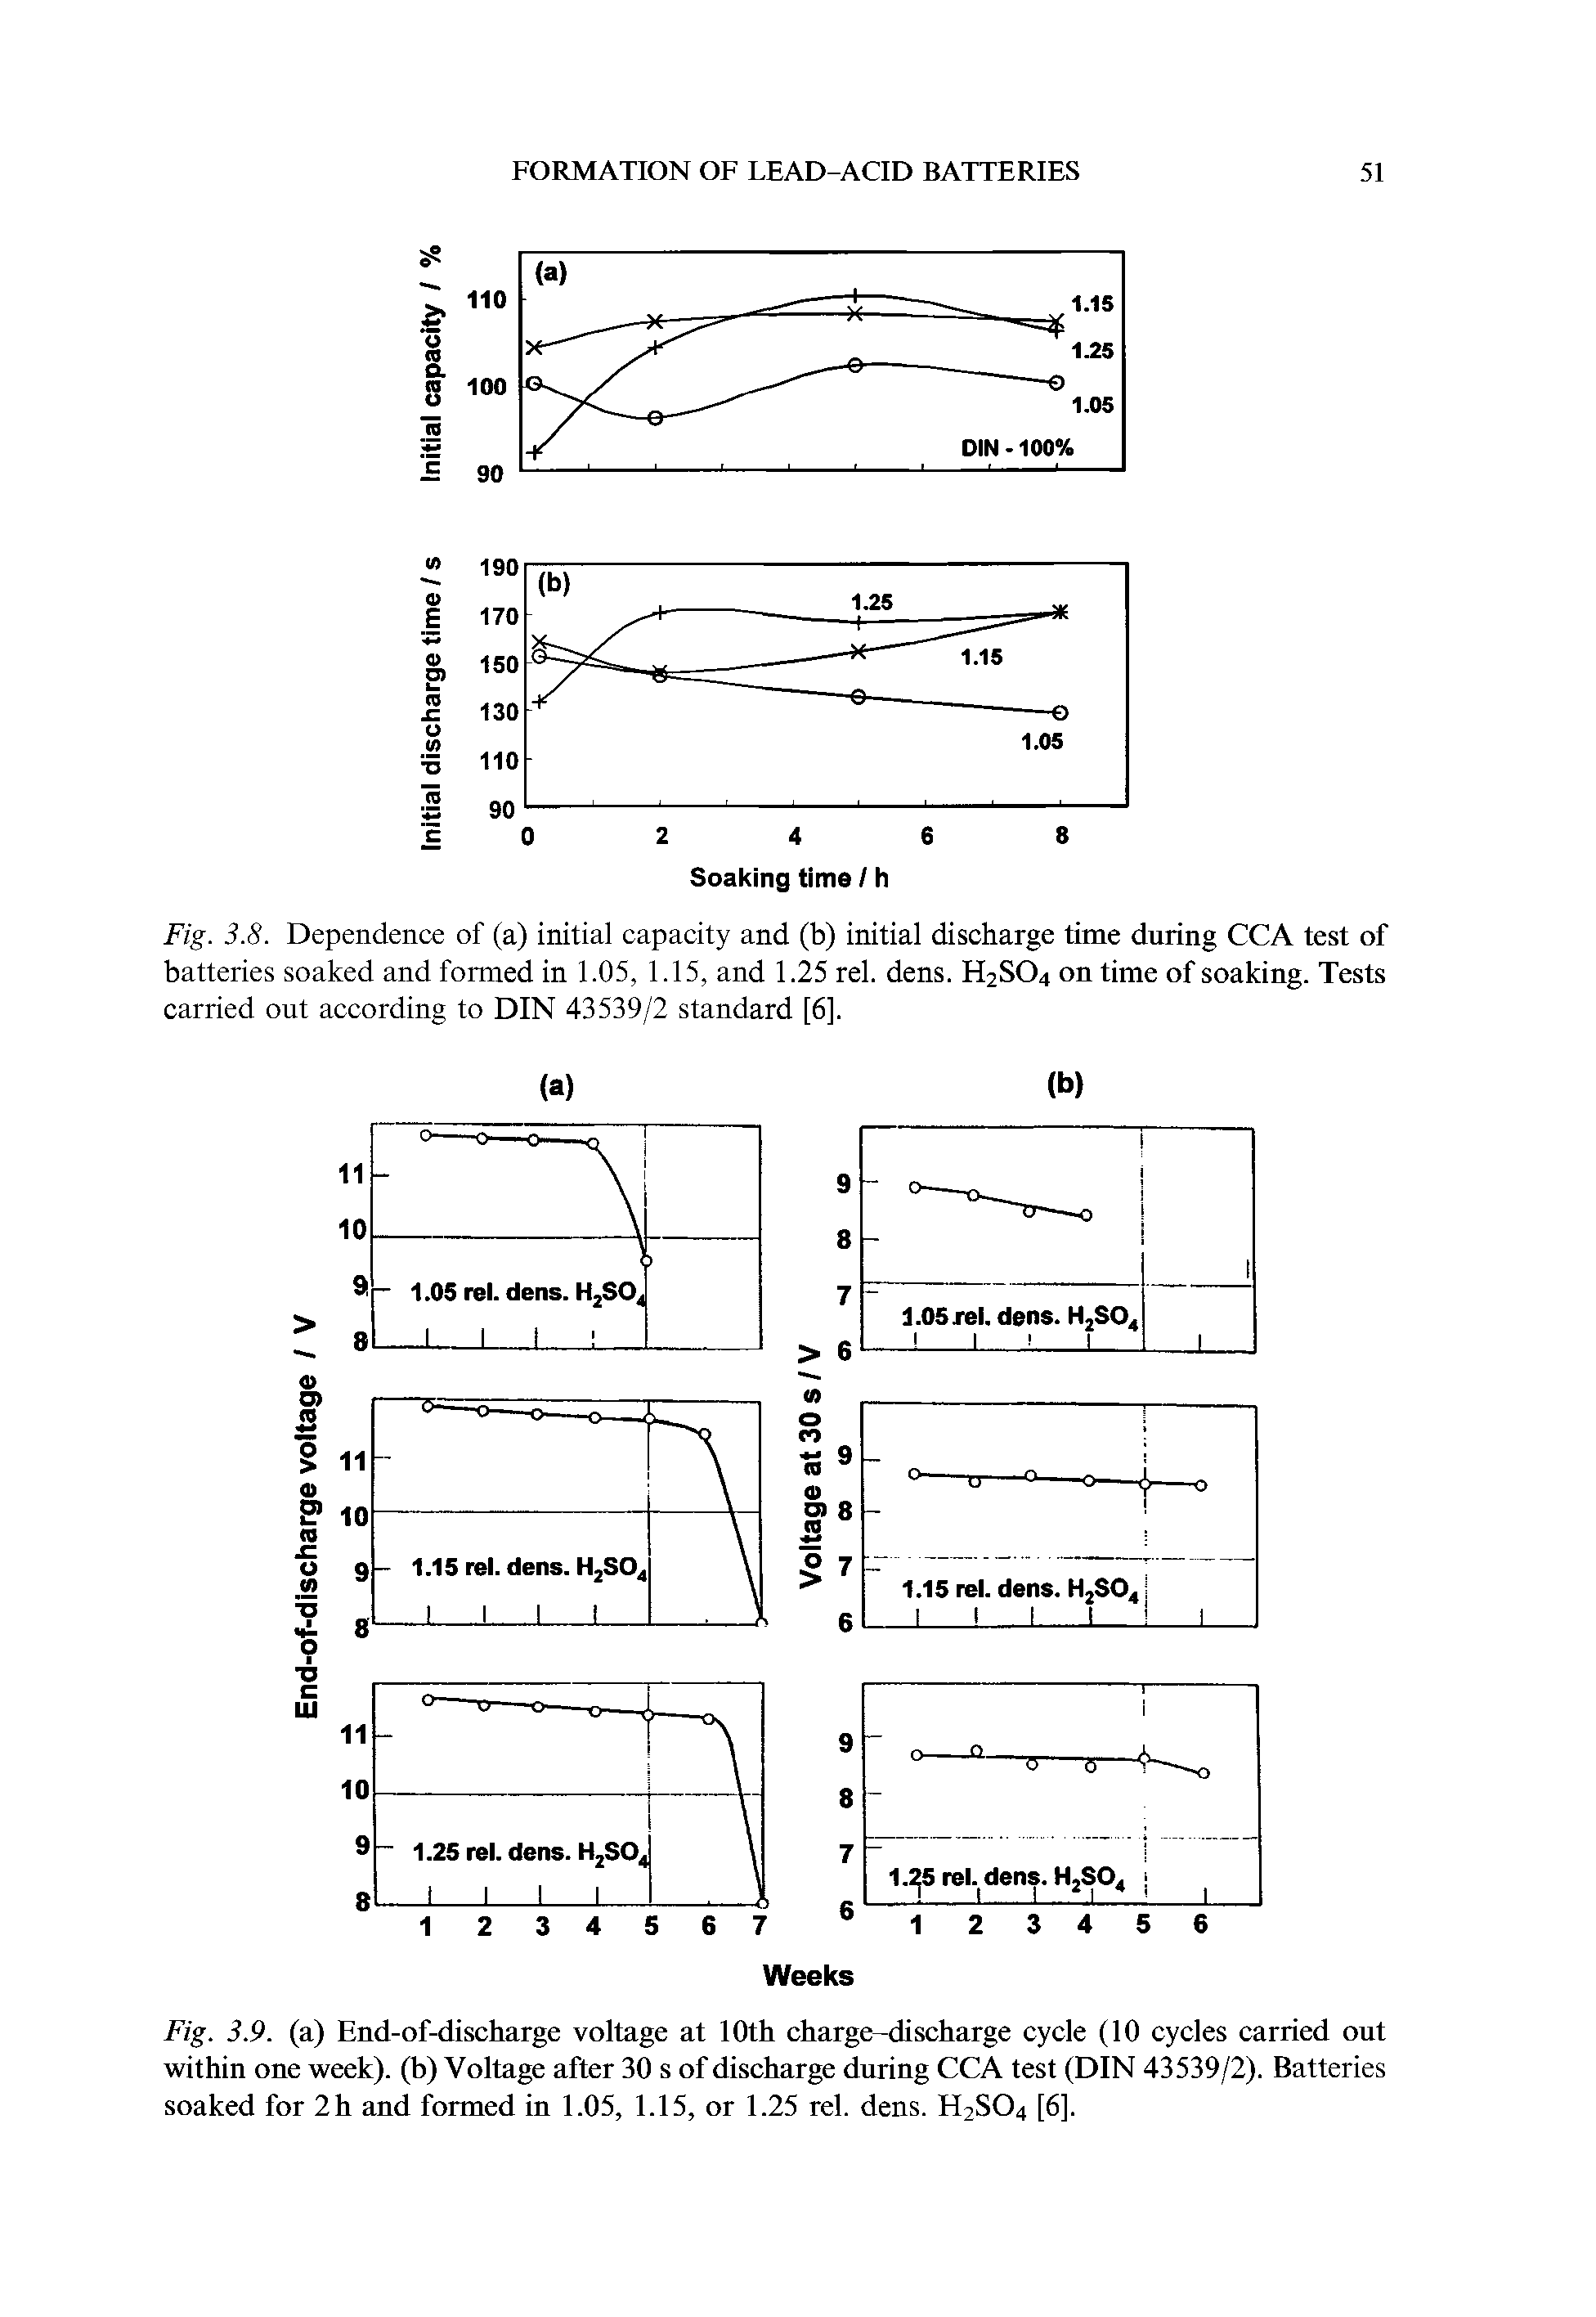 Fig. 3.8. Dependence of (a) initial capacity and (b) initial discharge time during CCA test of batteries soaked and formed in 1.05, 1.15, and 1.25 rel. dens. H2SO4 on time of soaking. Tests...